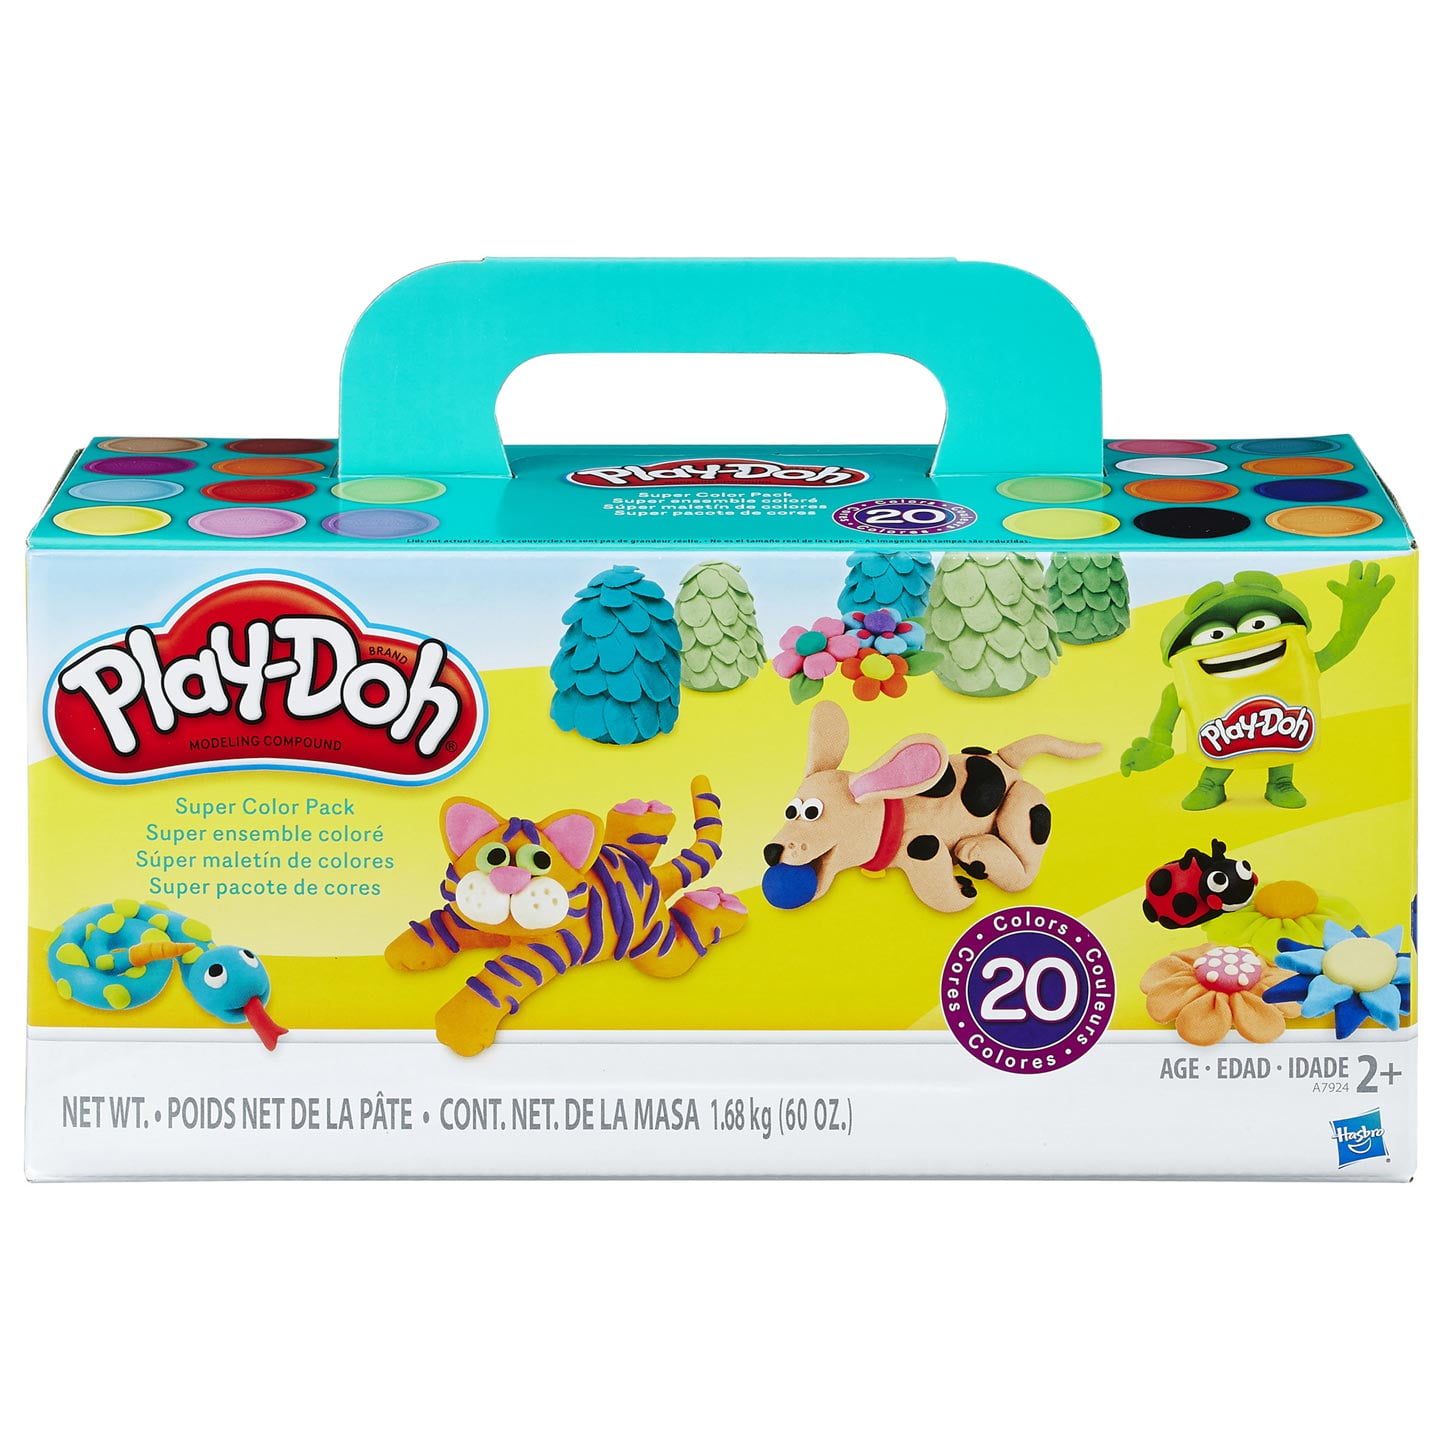 Play-Doh Super Color Pack, 3 Ounces, Assorted Colors, Set of 20